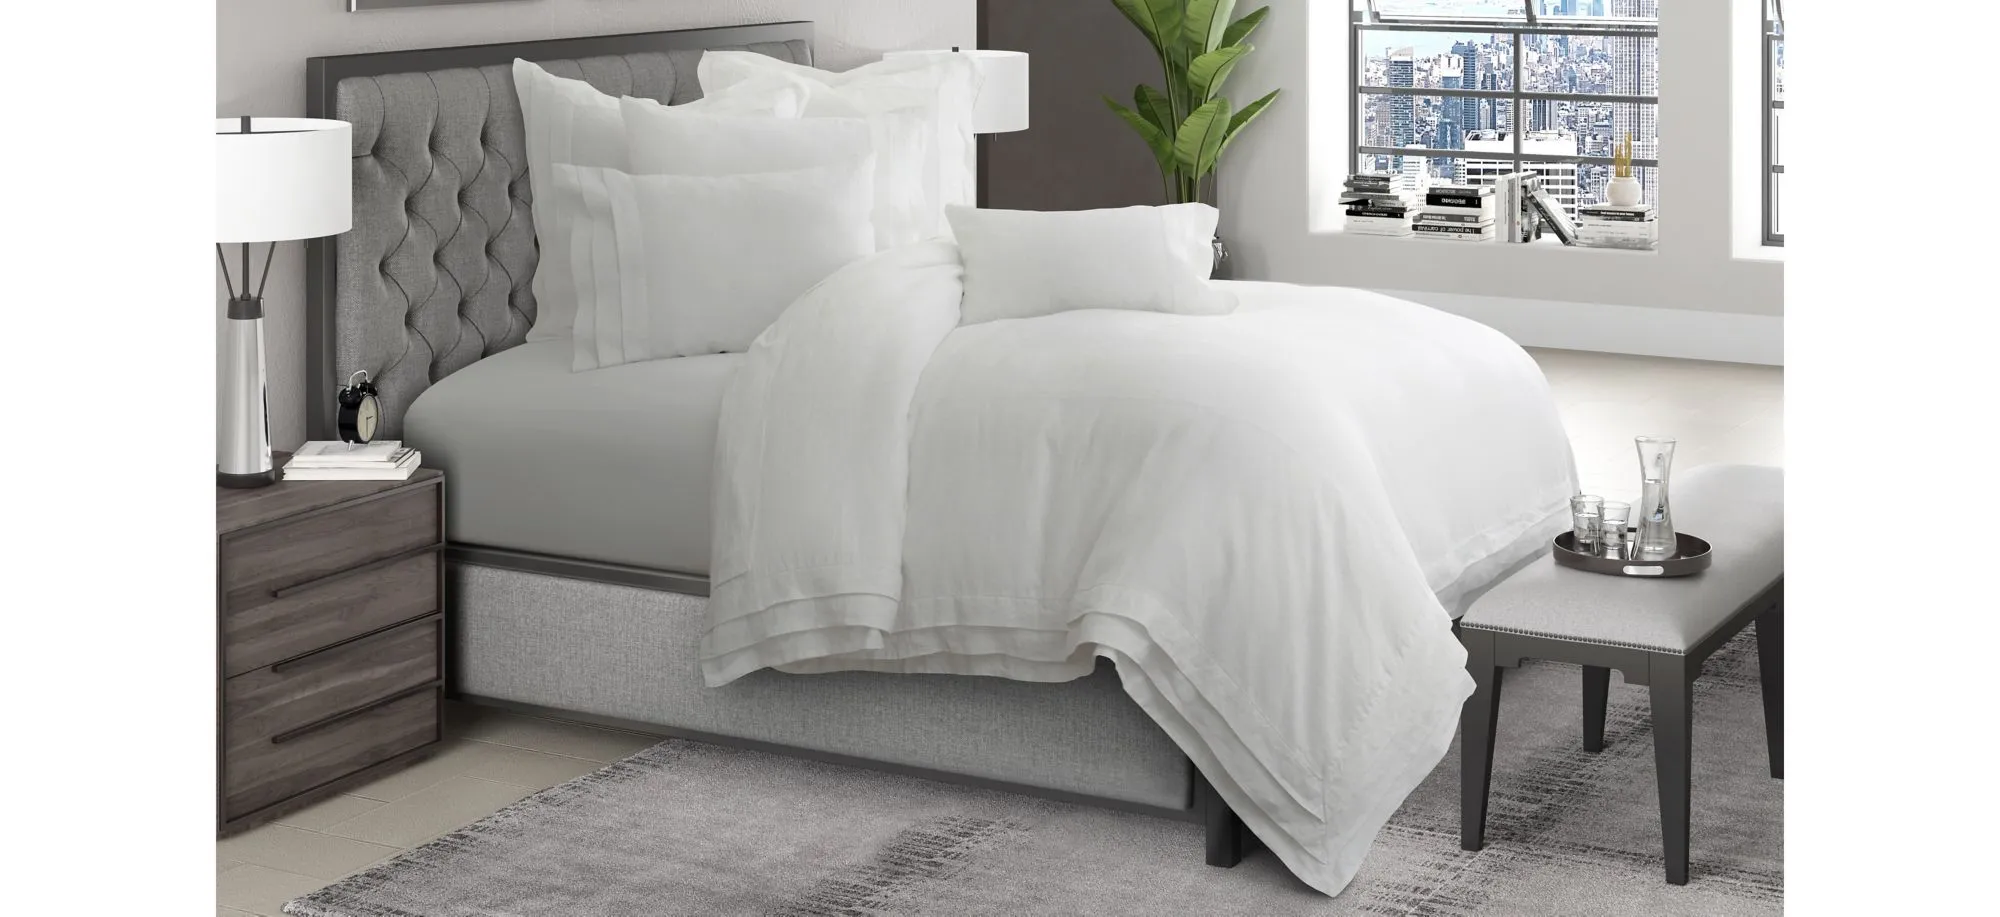 Addison 6-Piece Duvet Set in White by Amini Innovation